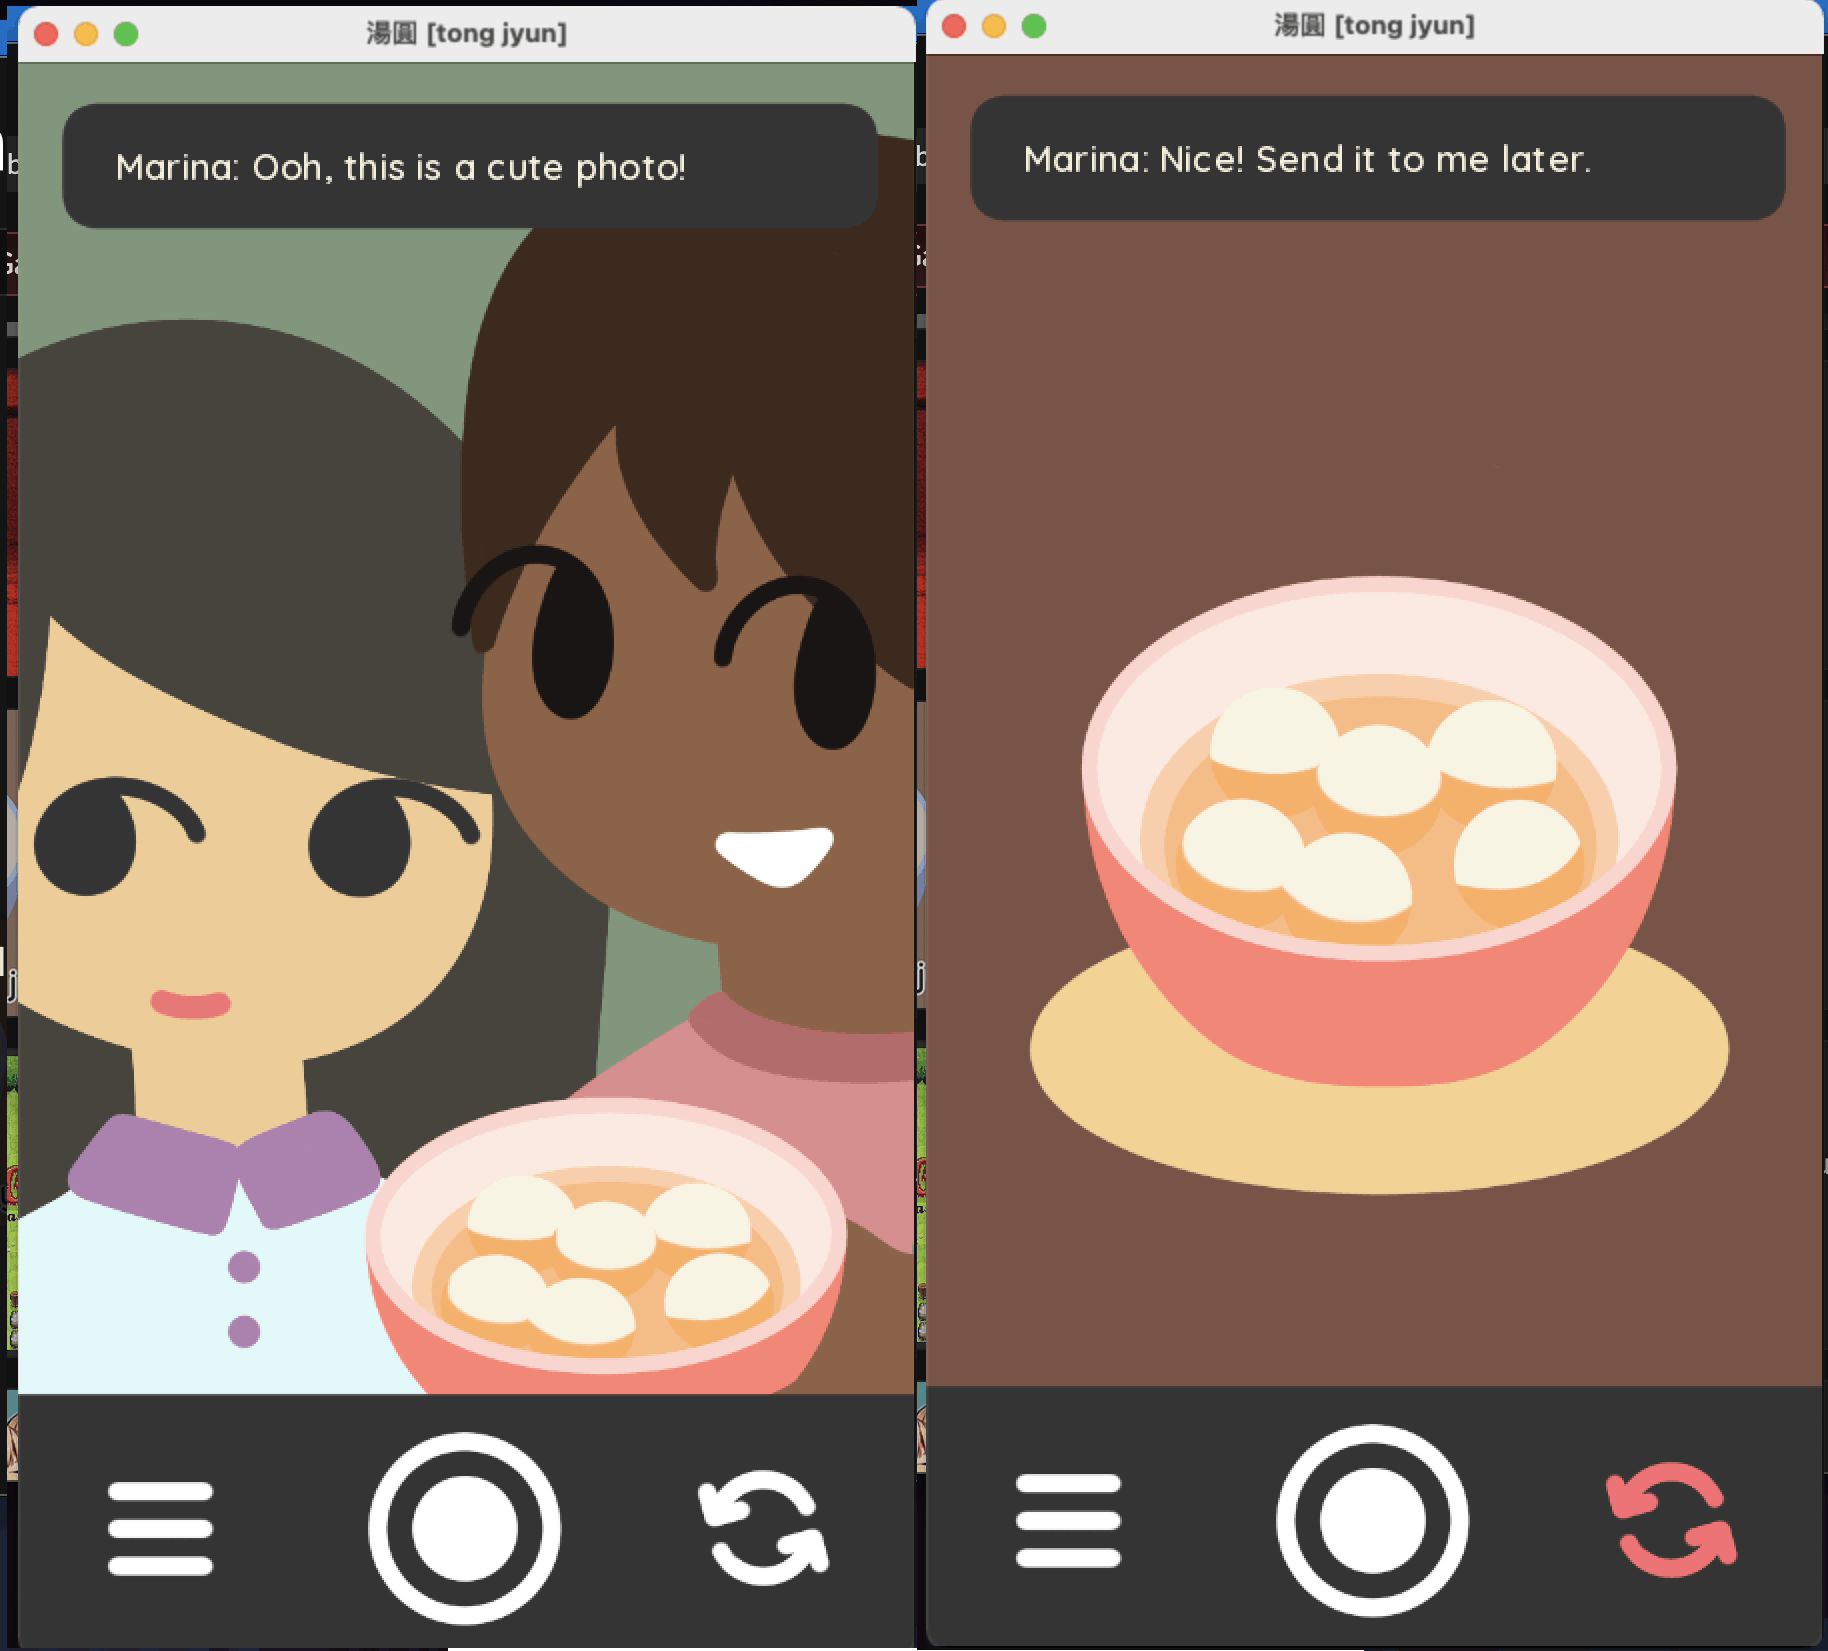 Simulated inside of a phone's camera app, two photos from the game 湯圓 [tong jyun]. One shows a couple holding a bowl of that dessert, the other is the bowl itself.